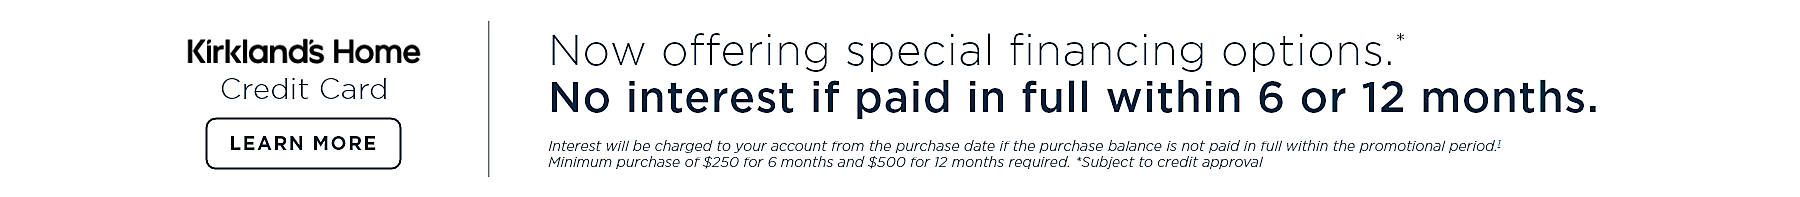 K card Now offering special financing options.* No interest if paid in full within 6 or 12 months. Interest will be charged to your account from the purchase 071921 if the purchase balance is not paid in full within the promotional period.1 Minimum purchase of $250 for 6 months and $500 for 12 months required. *Subject to credit approval. Learn more